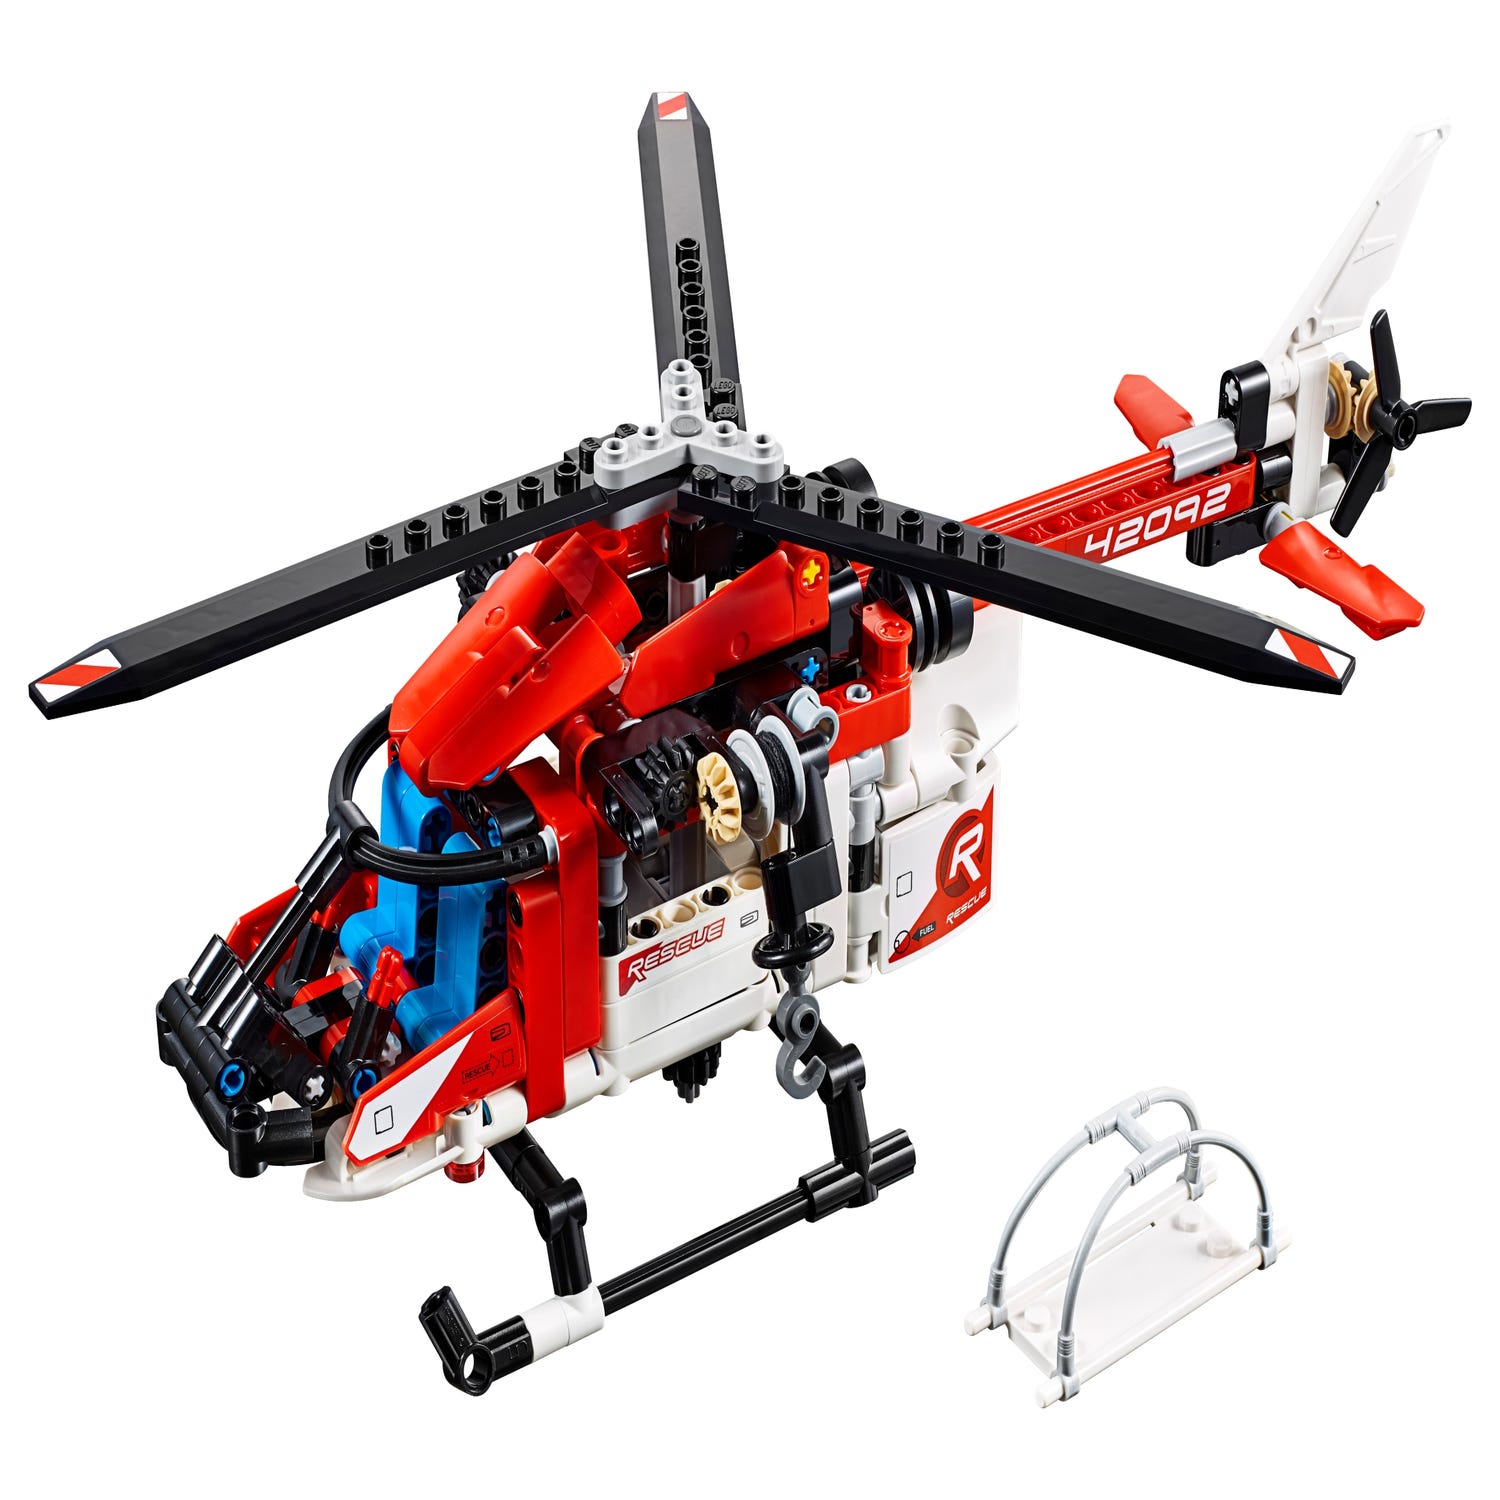 Rescue Helicopter 42092 | Technic™ | Buy at the Official LEGO® Shop US